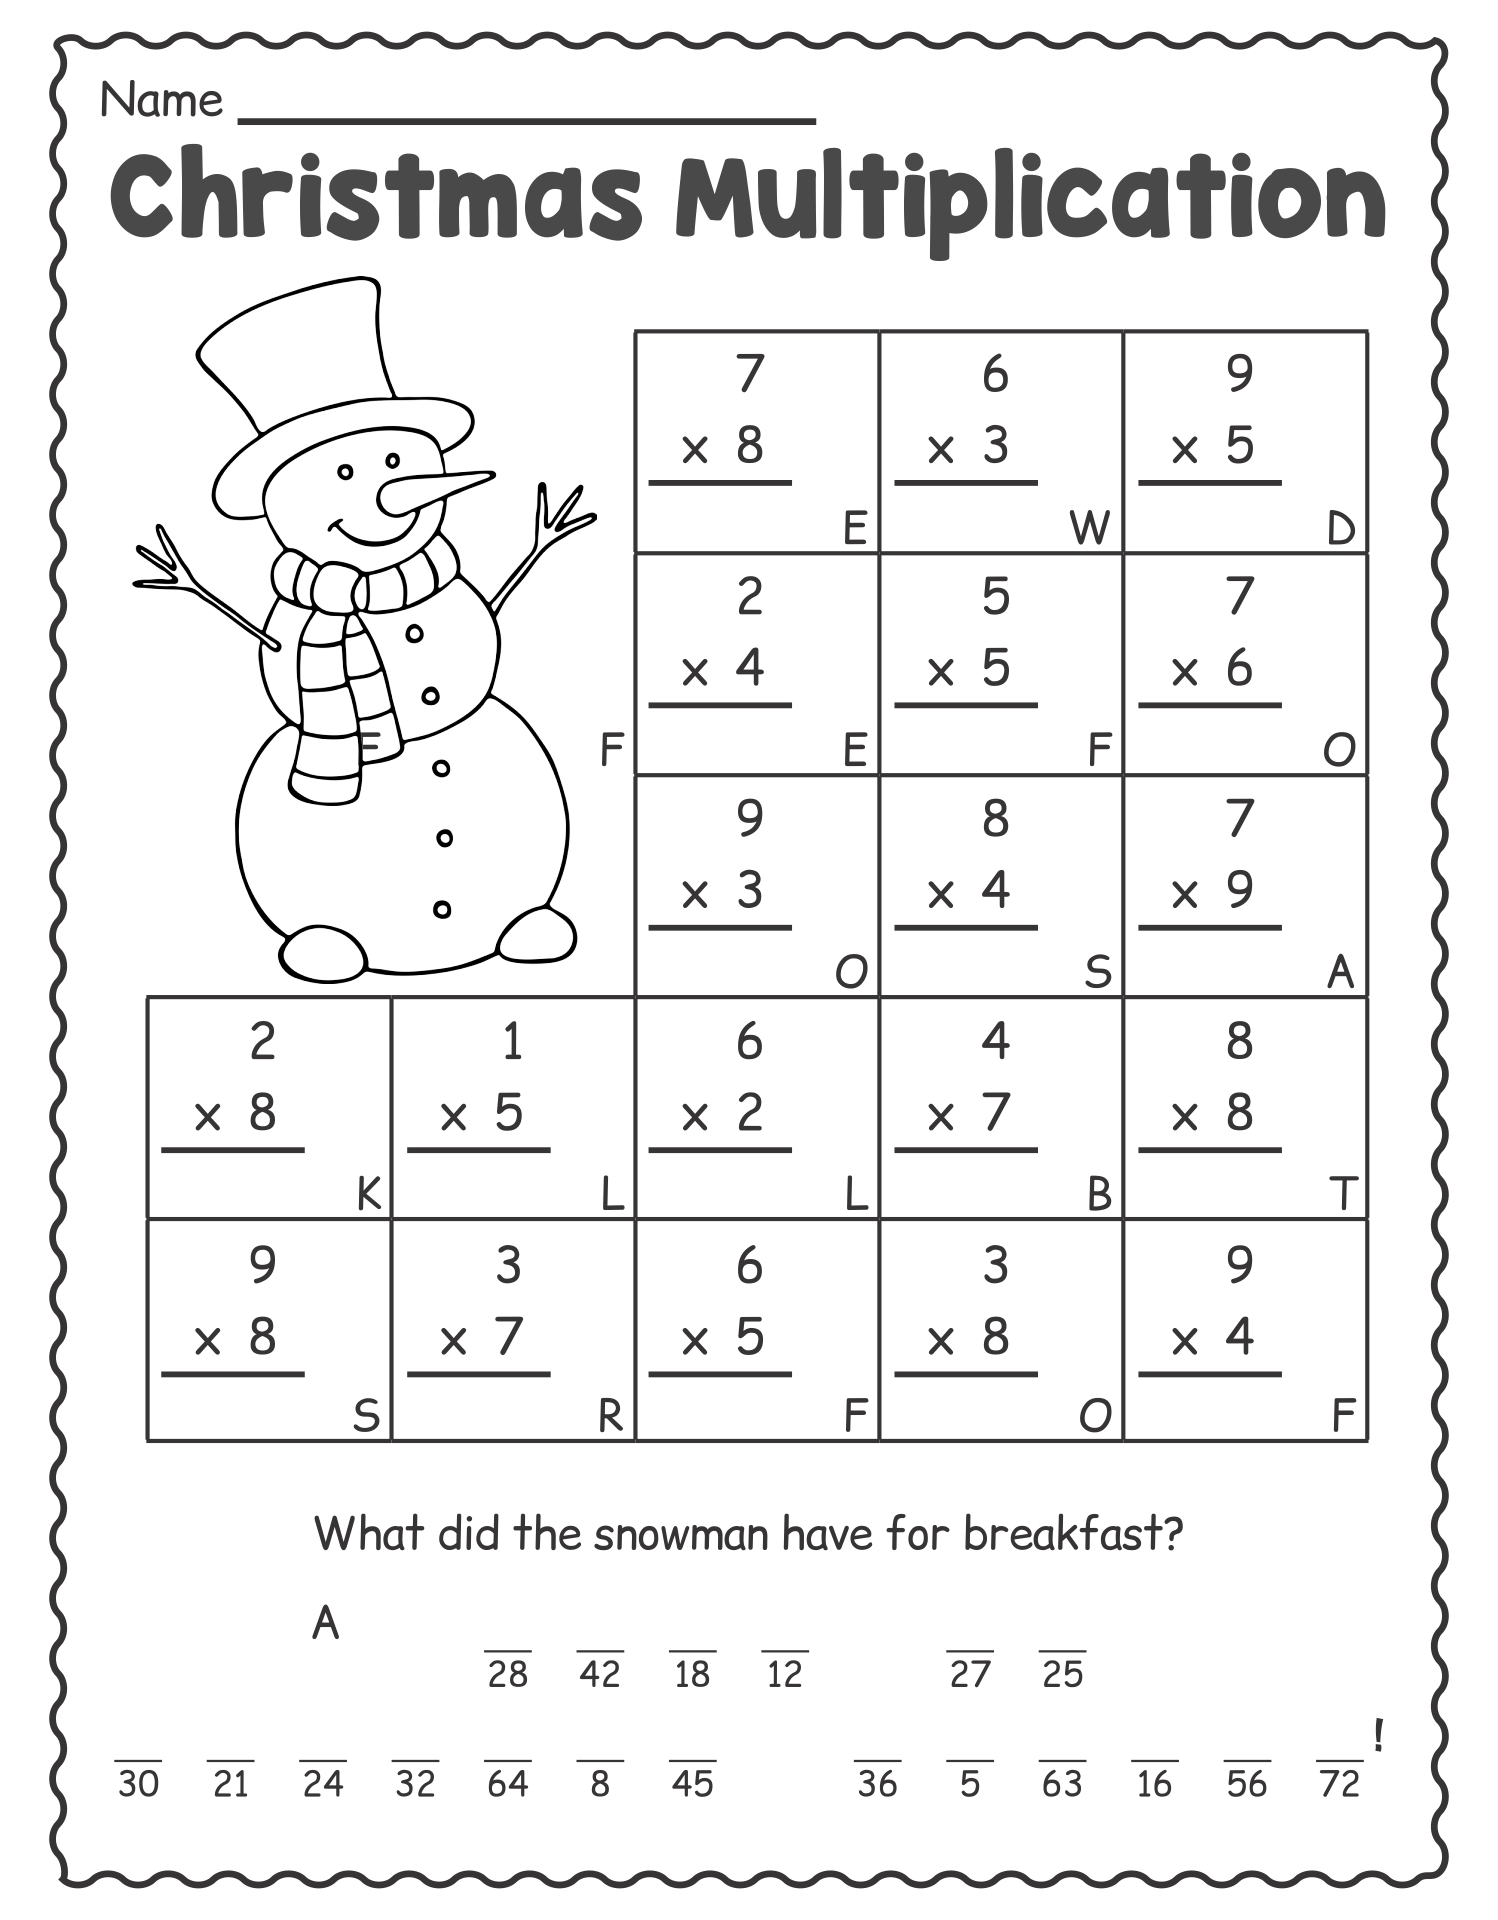 4-best-images-of-printable-worksheets-for-1st-grade-christmas-free